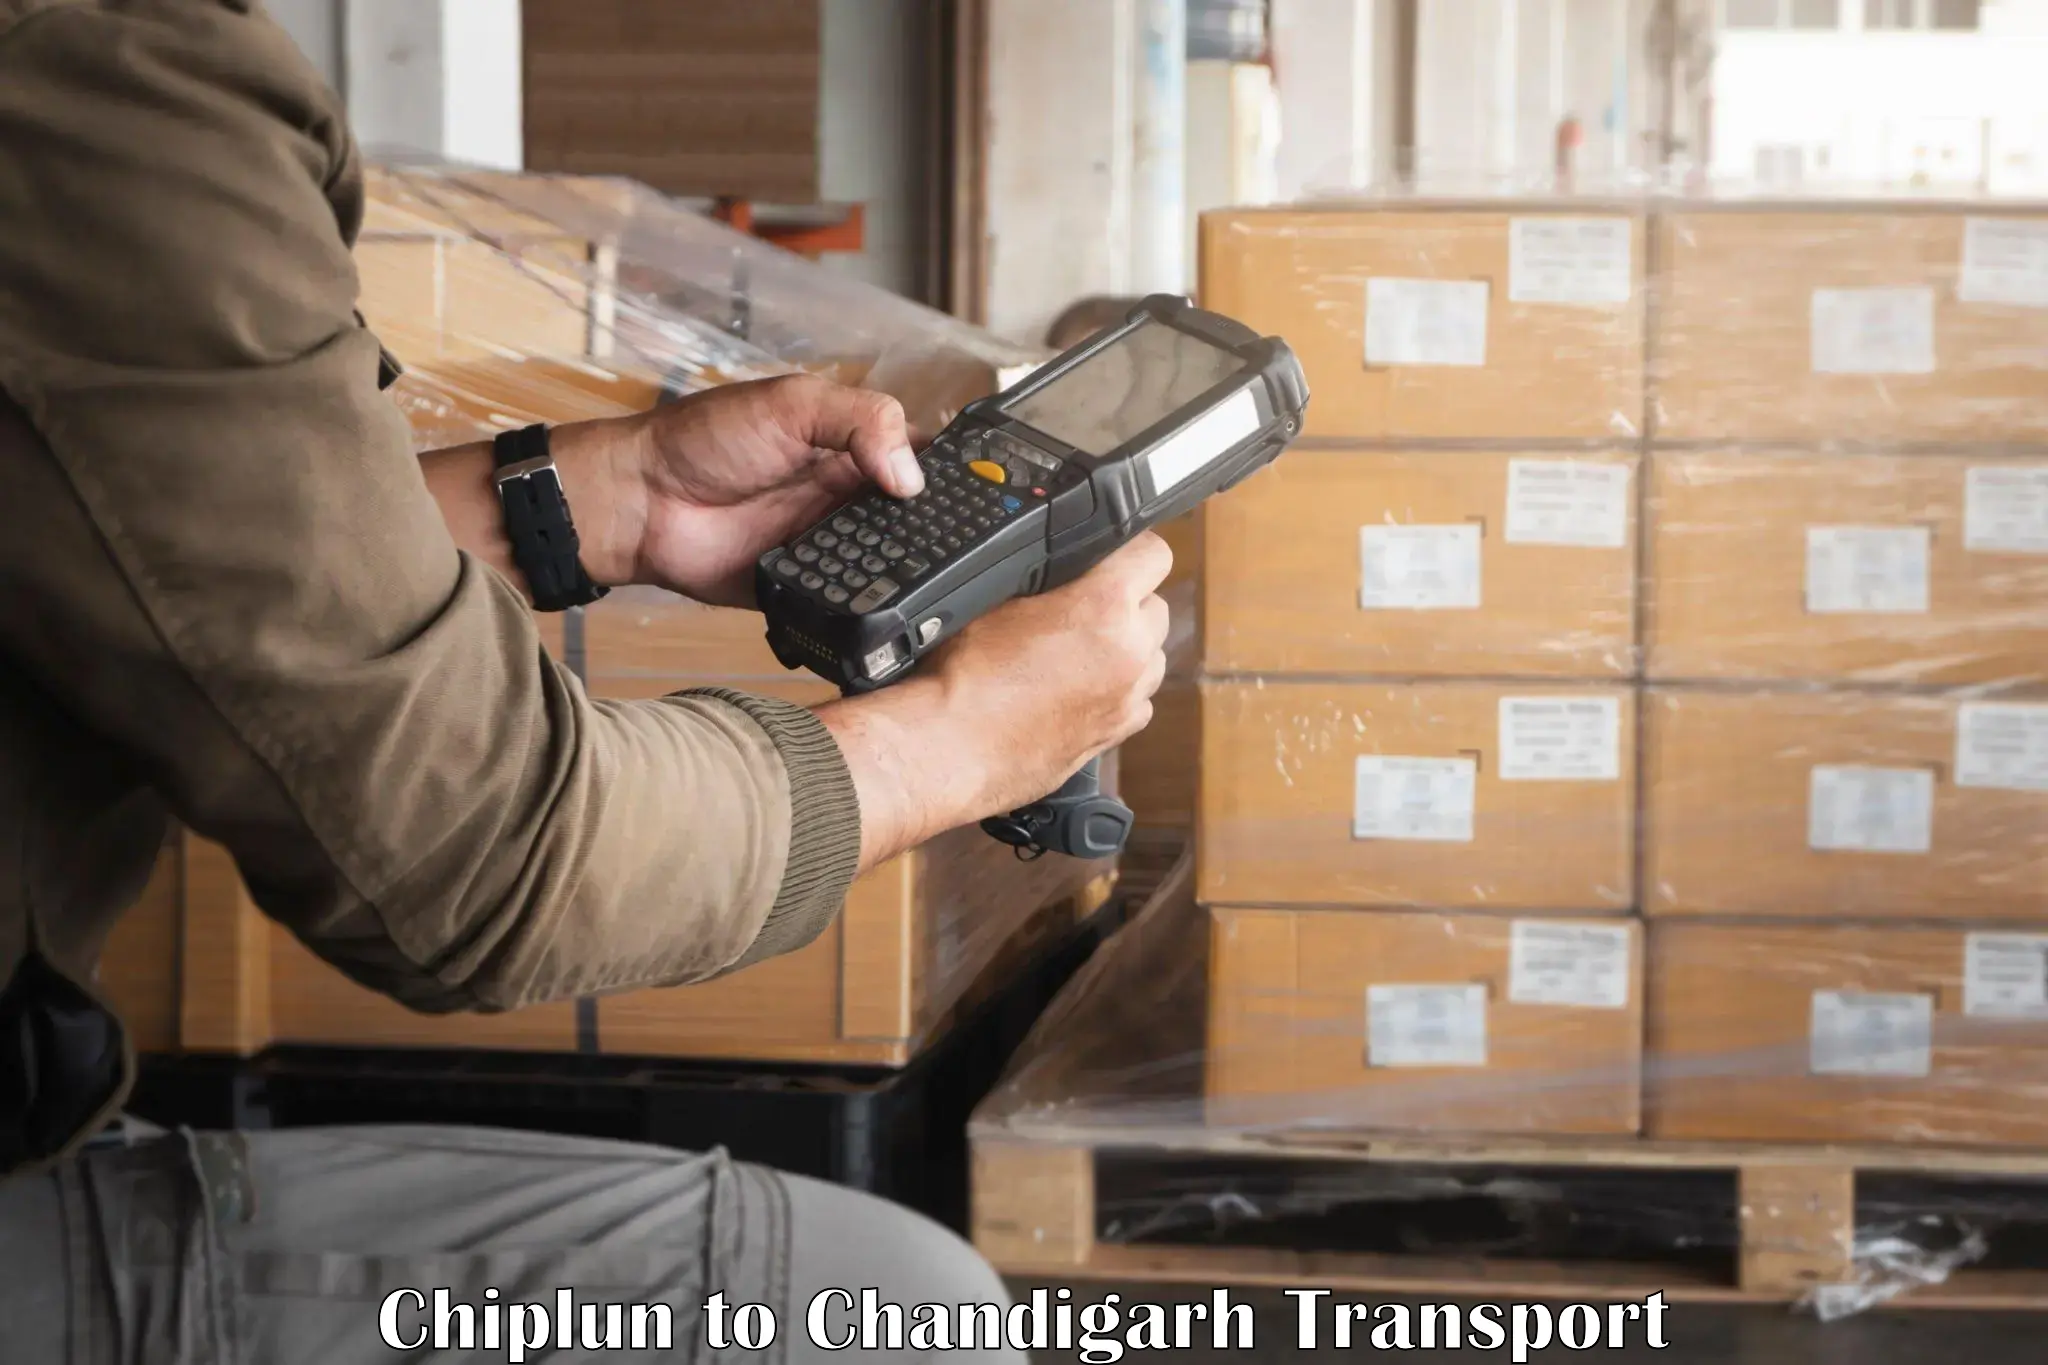 Air freight transport services Chiplun to Chandigarh